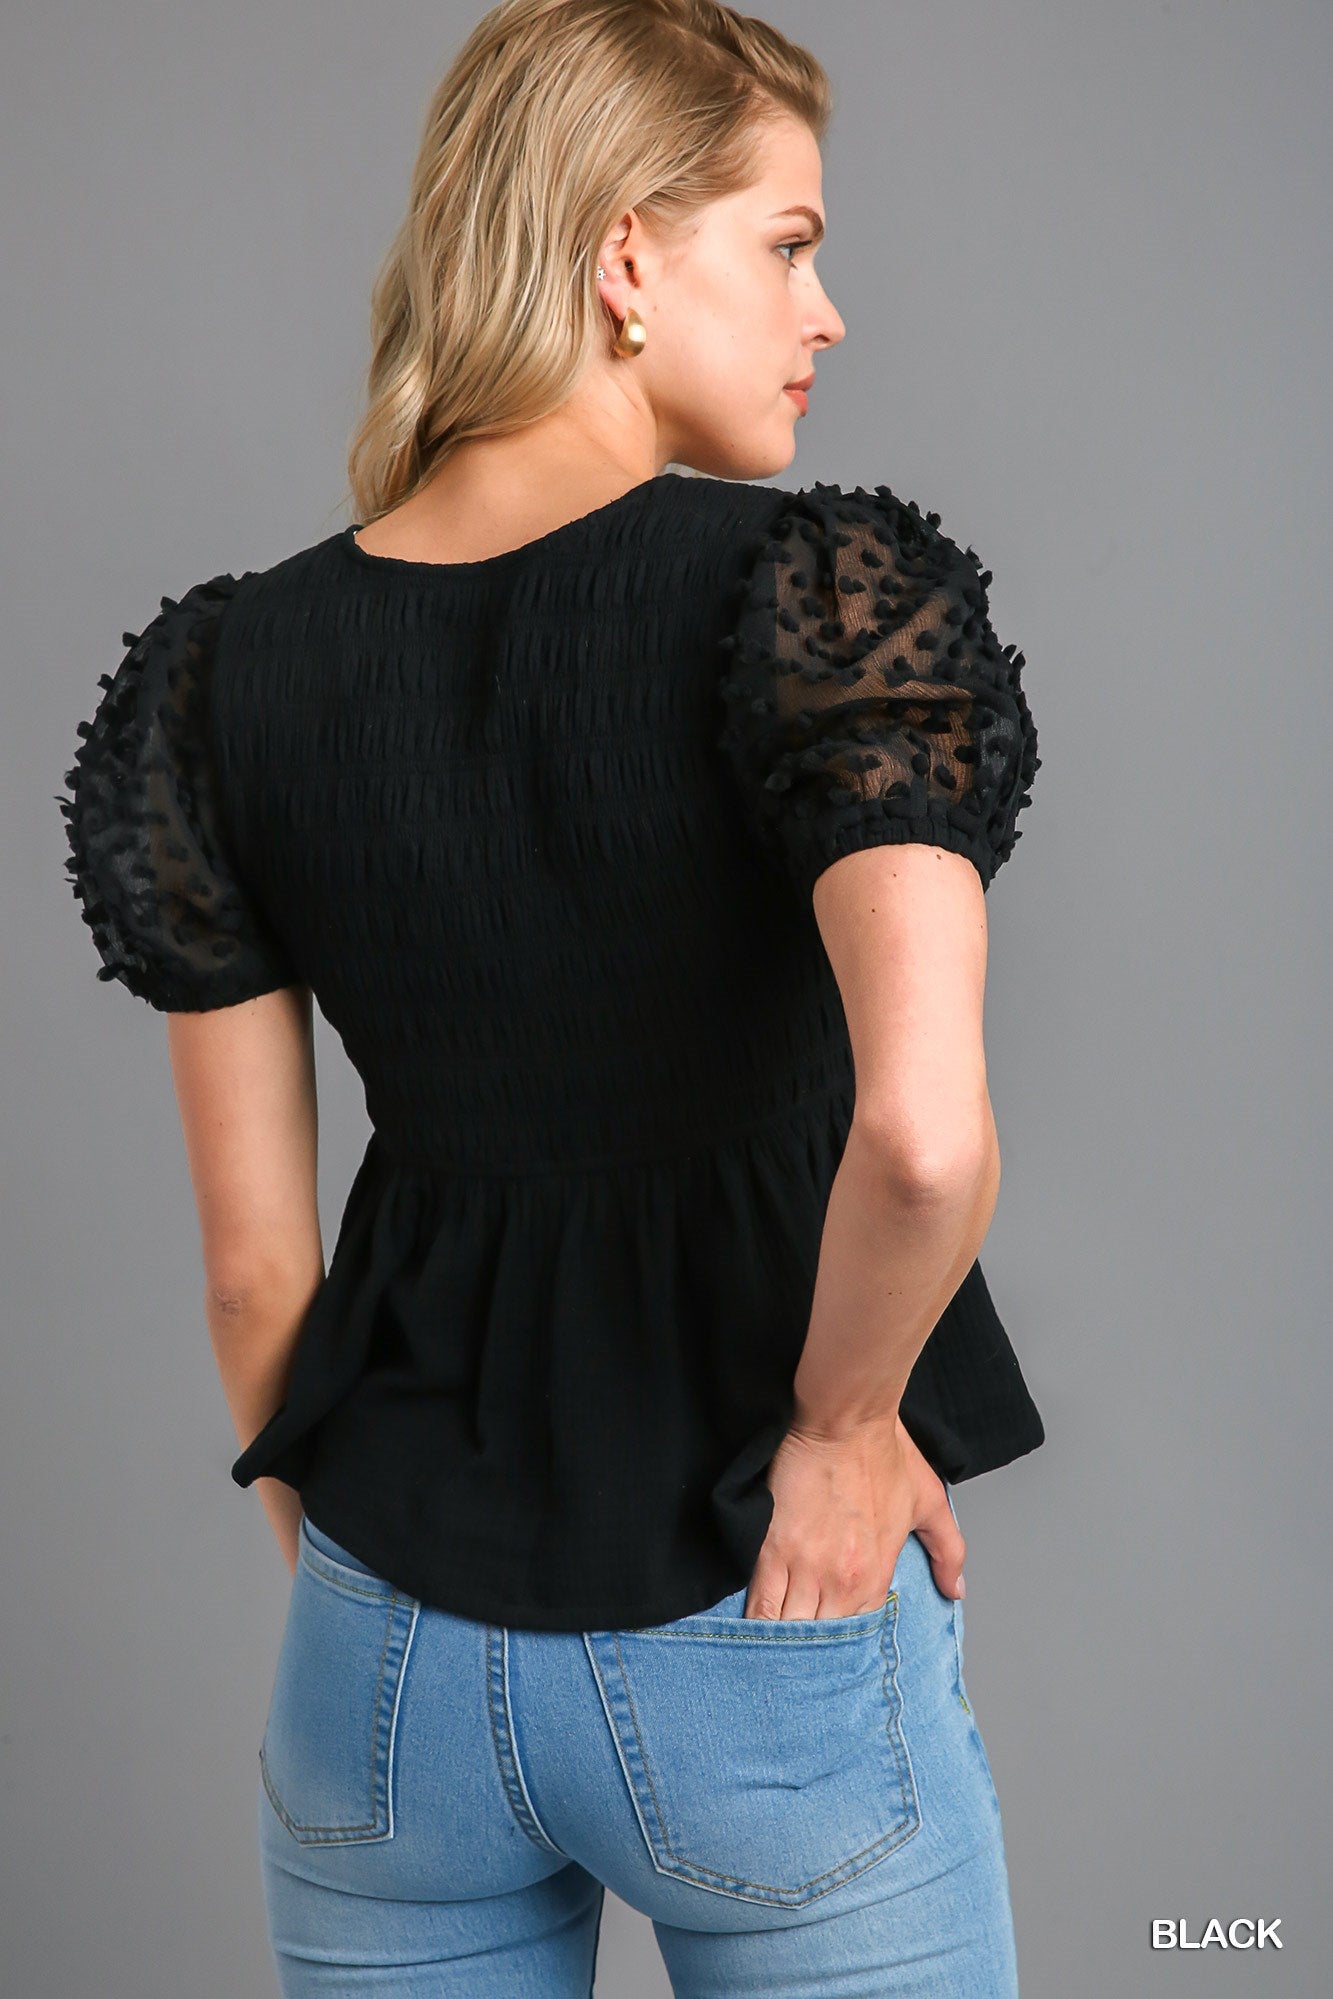 Umgee Smocking V-Neck 3D Floral Applique Detail Cuffed Puffed Sleeve Top